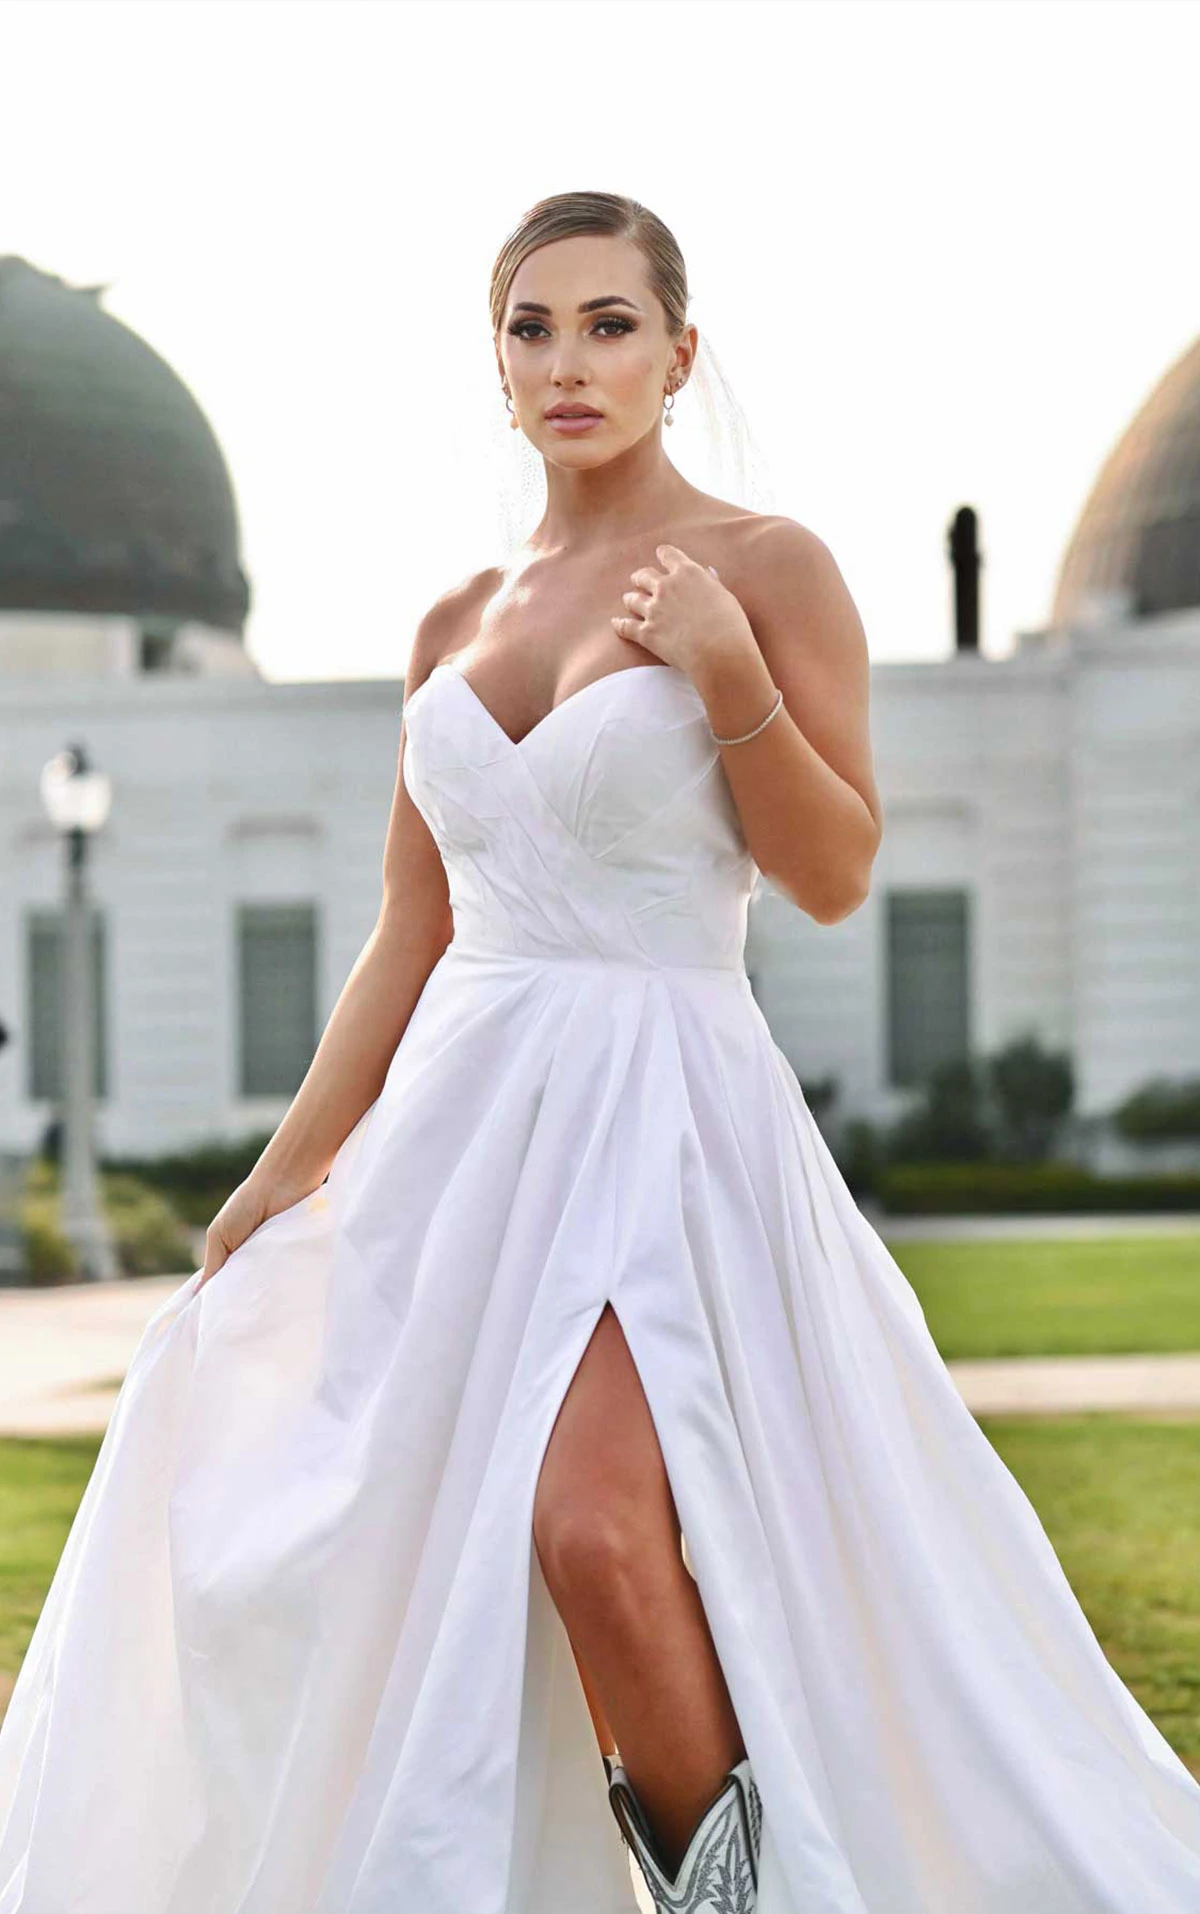 1524 Strapless Couture Silk A-Line Wedding Dress with Skirt Split and Bow Detail  by Martina Liana